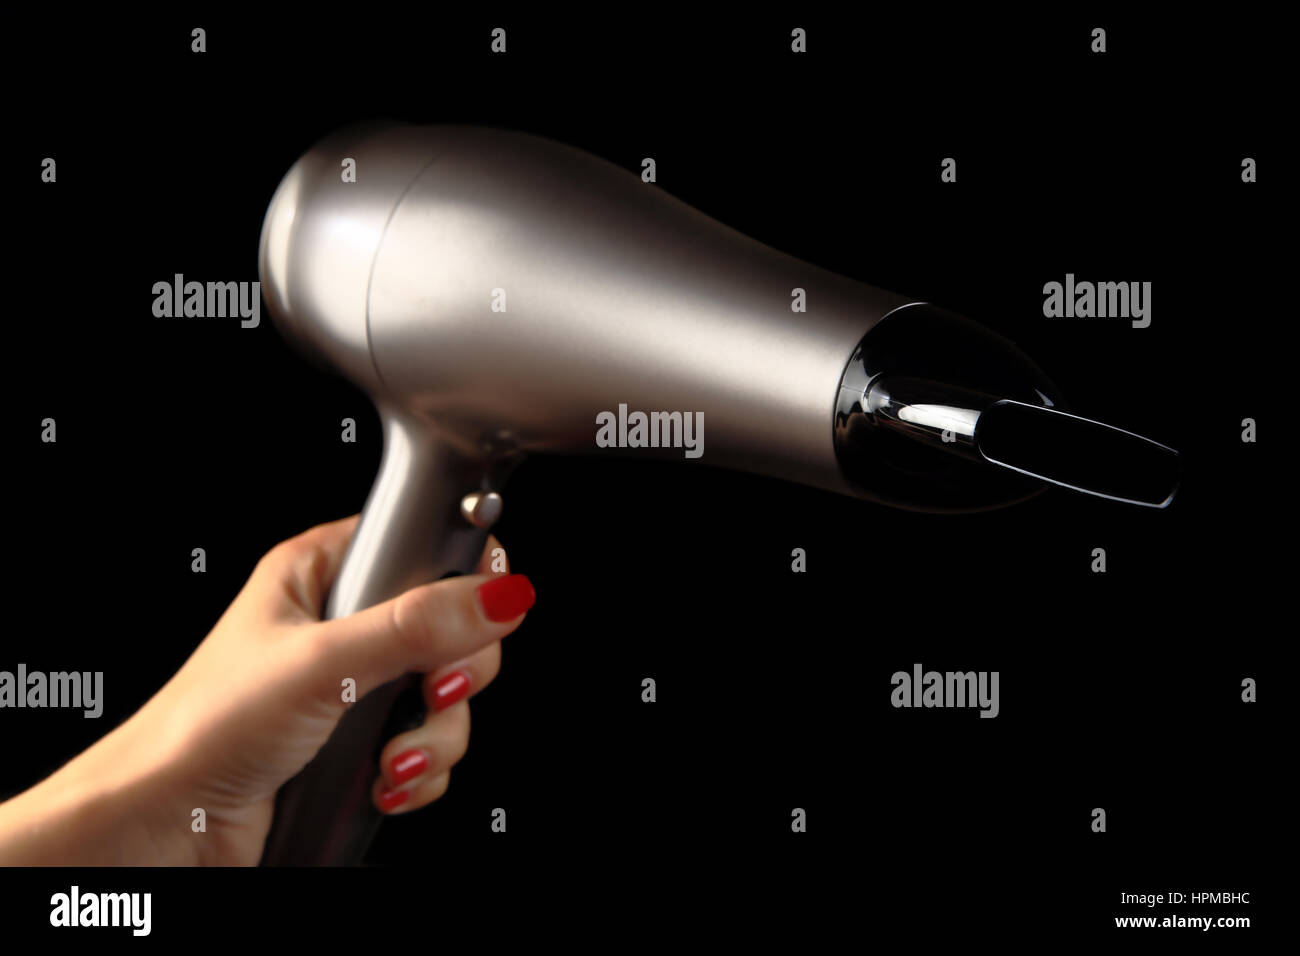 Hair dryer in  female hand. Black background. Hand with red painted nails Stock Photo